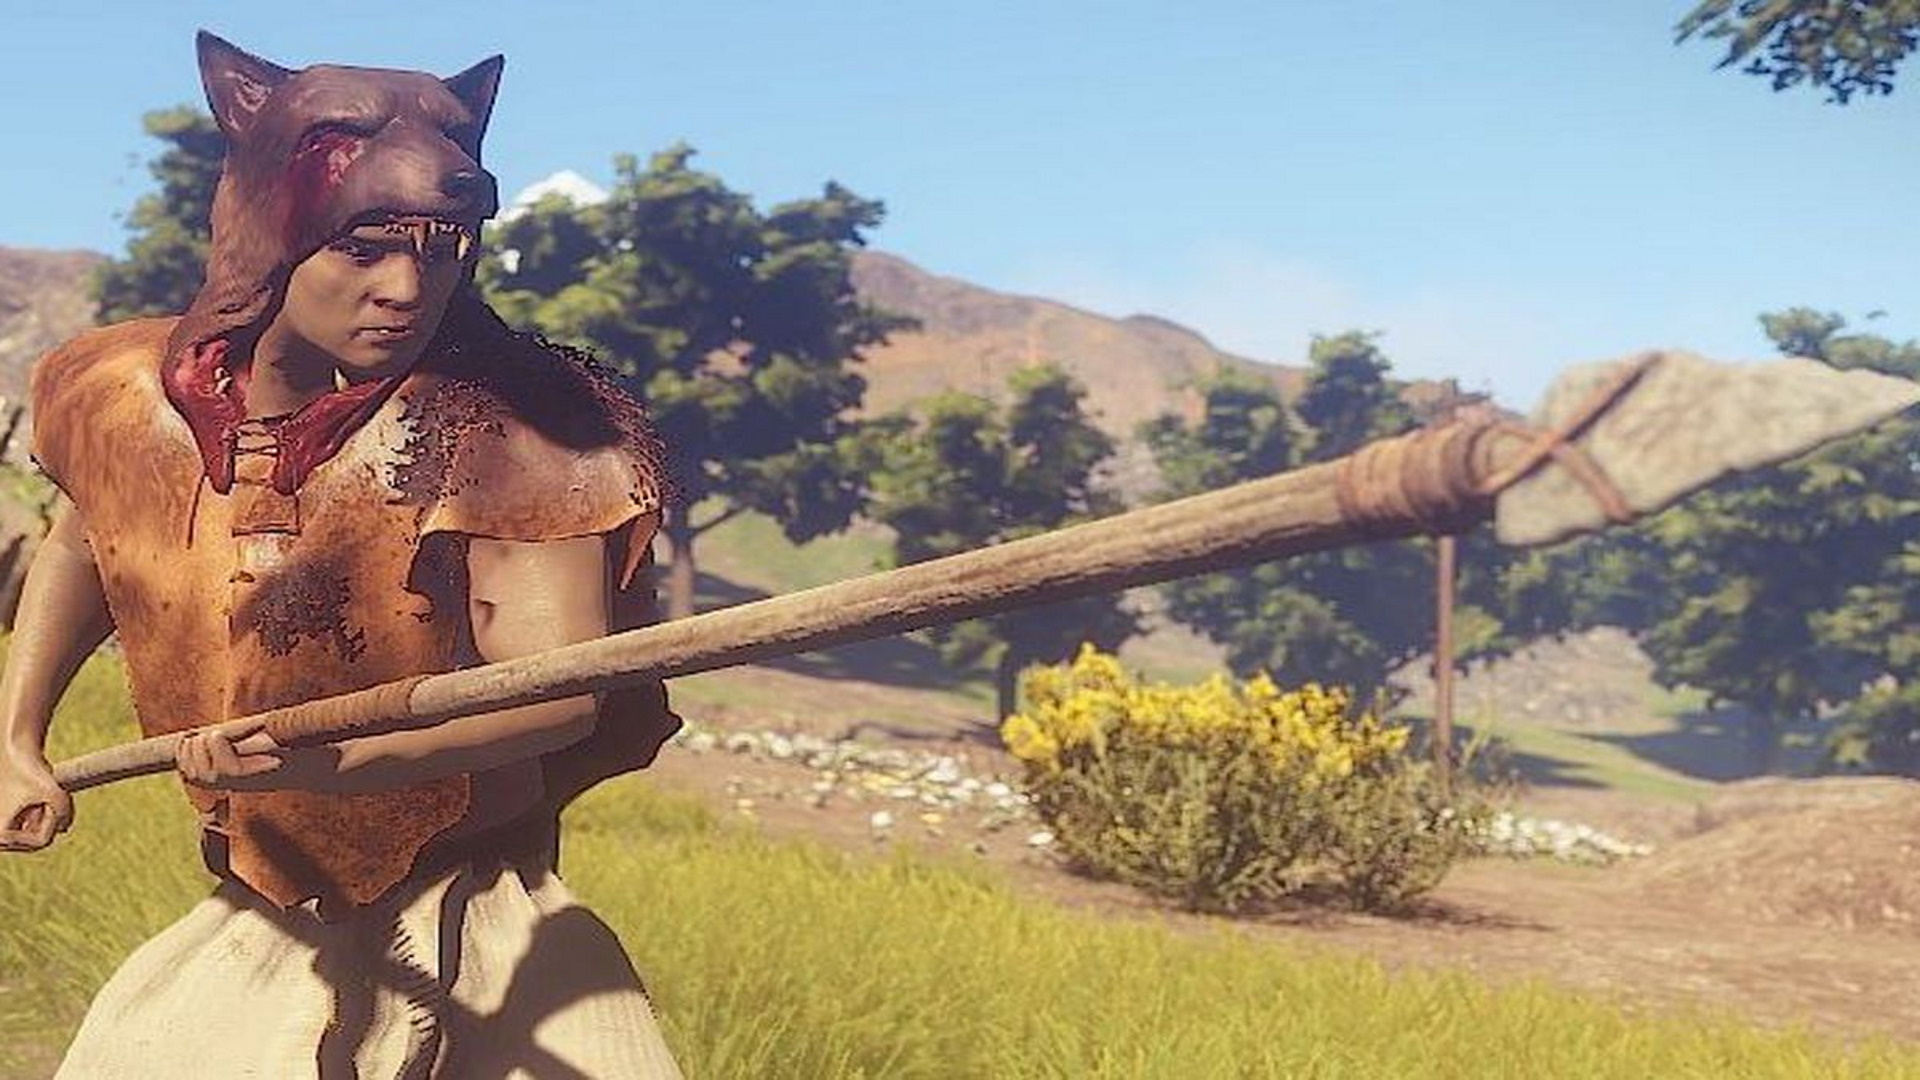 The Rust September update adds a brutal new mode to the survival game